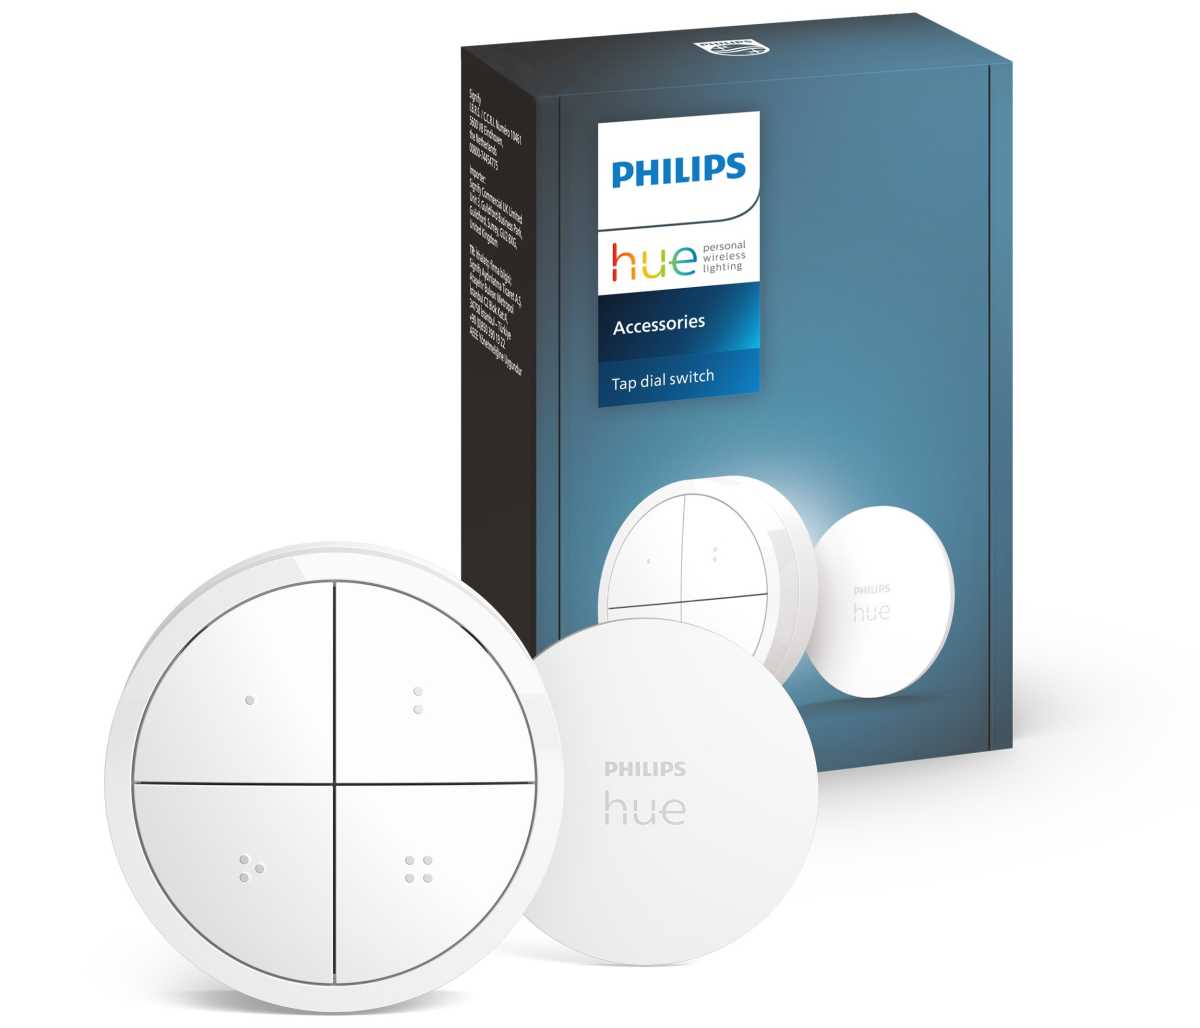 Philips Hue Tap dial switch with mini mount